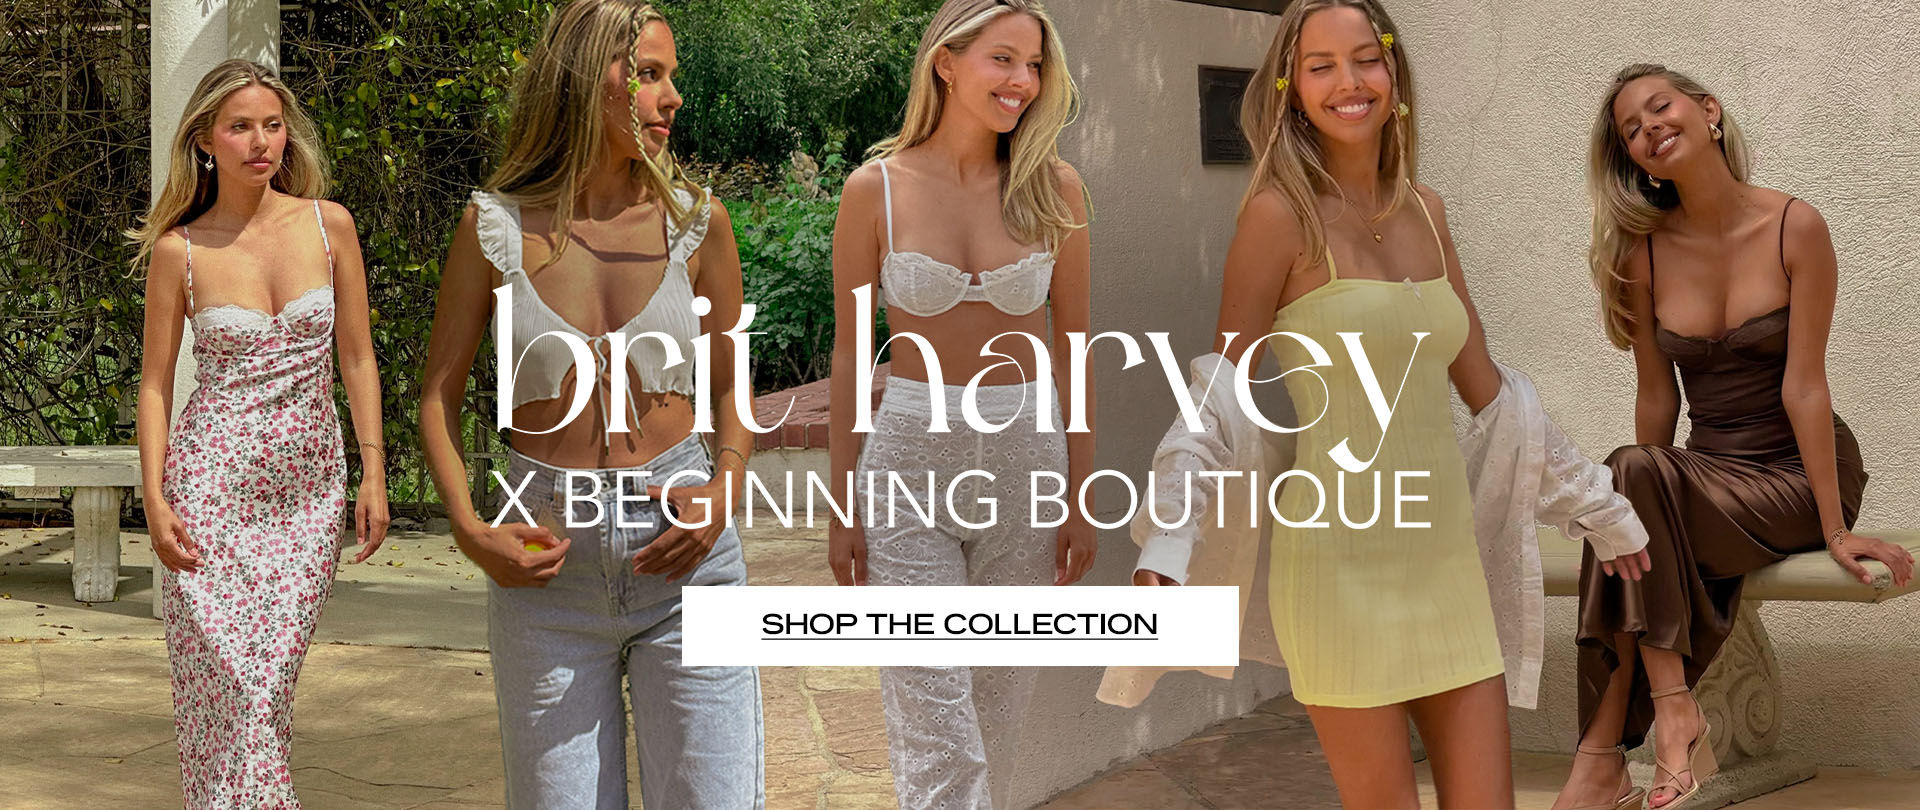 Homepage Shop Now Banner